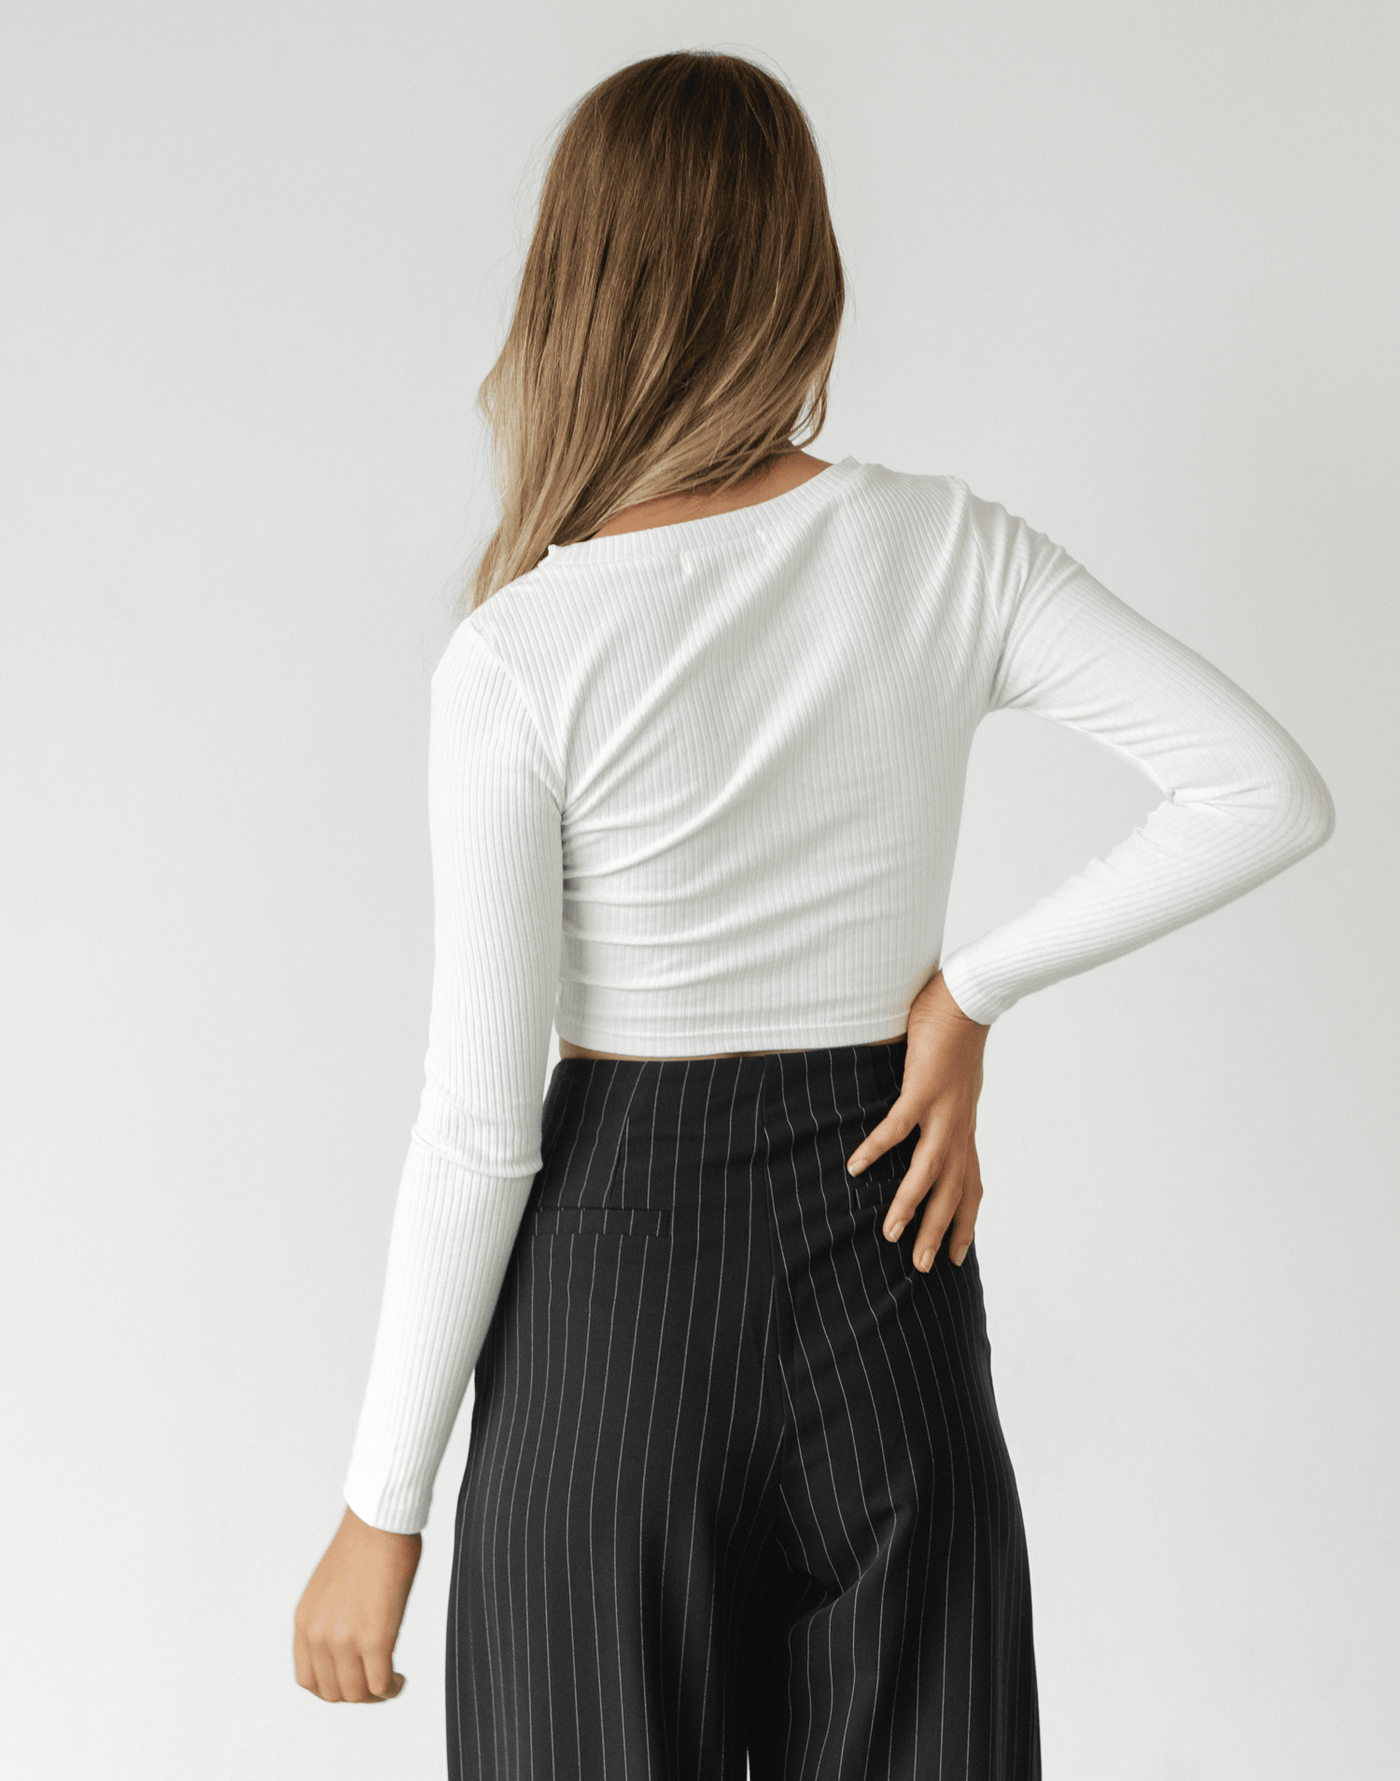 Charles Cut Out Top (White) - White Long Sleeve Top - Women's Top - Charcoal Clothing